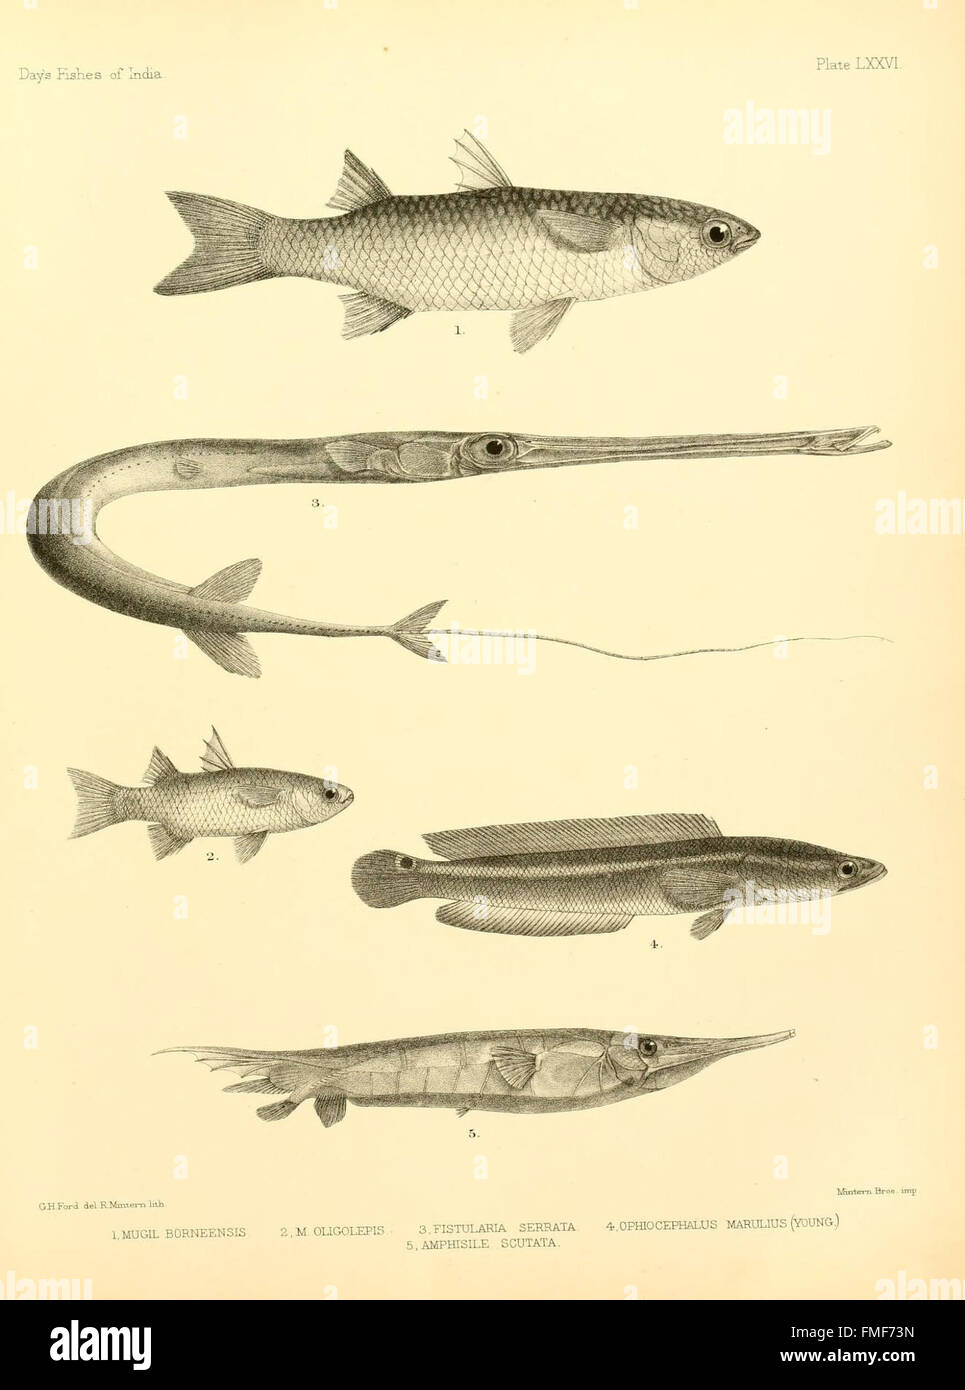 The fishes of India (Plate LXXVI) Stock Photo